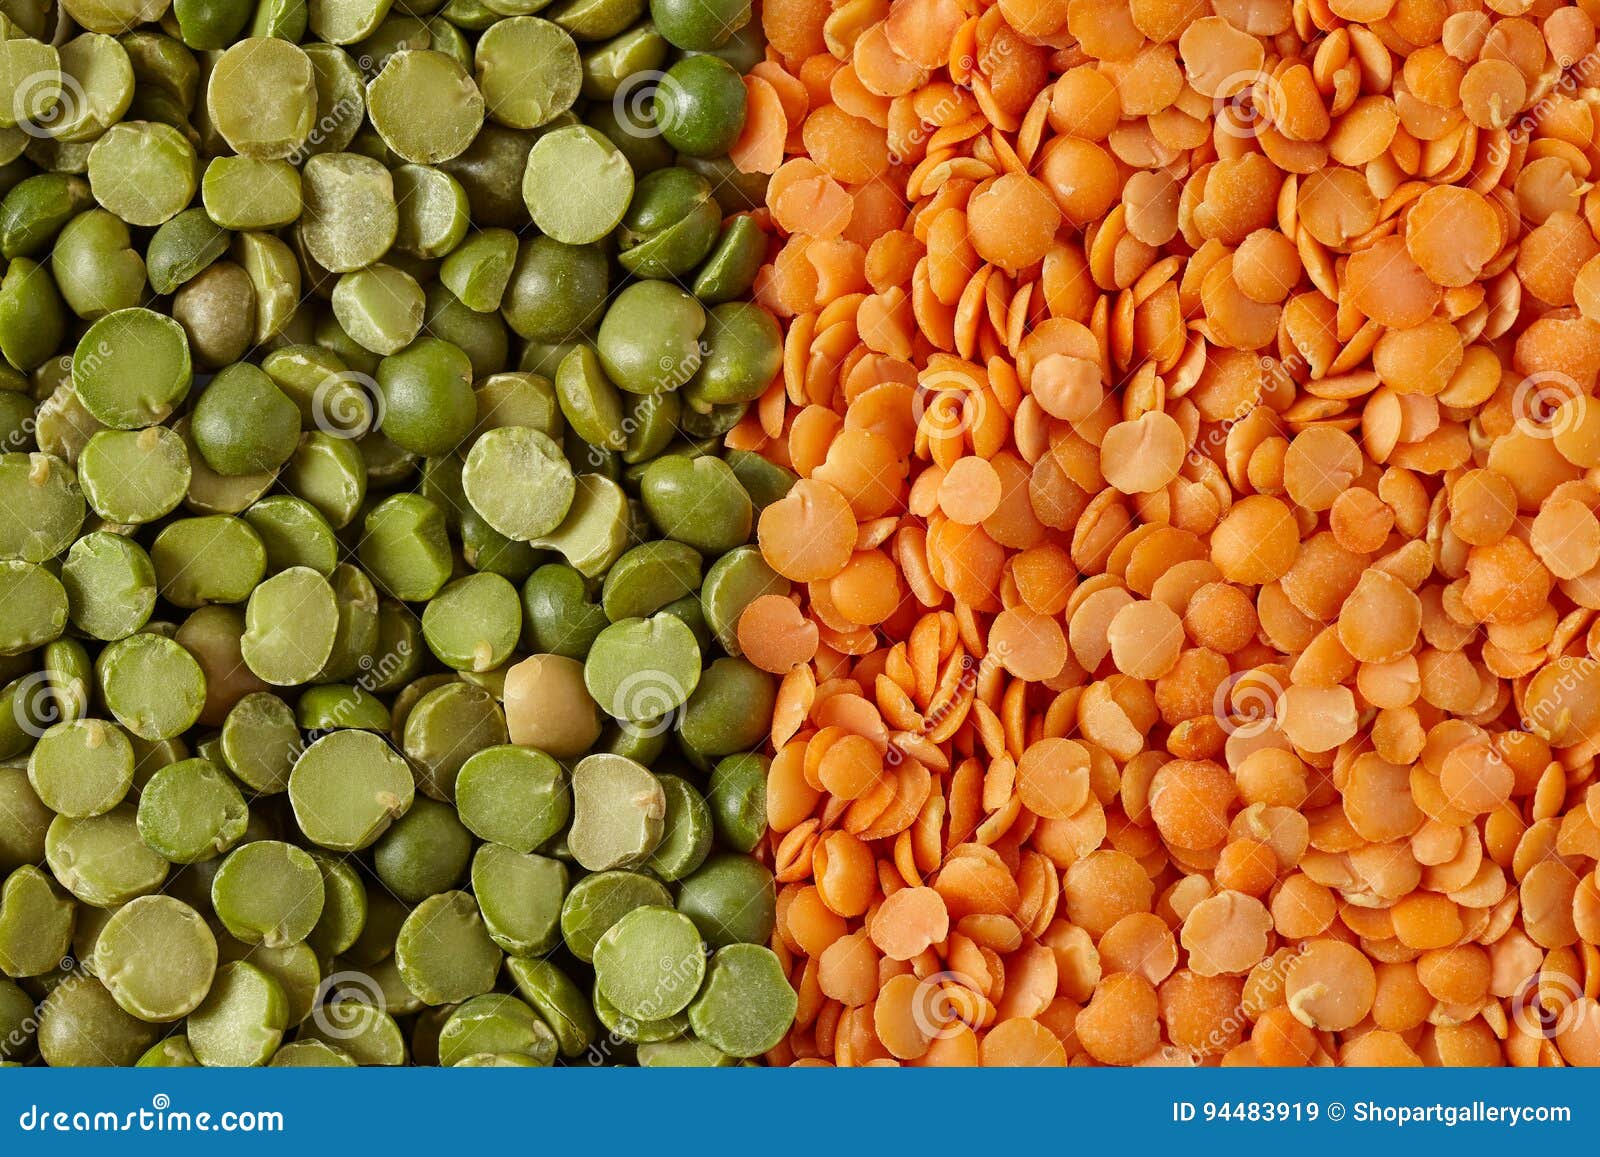 Green Split Peas and Red Stock - Image food, uncooked: 94483919